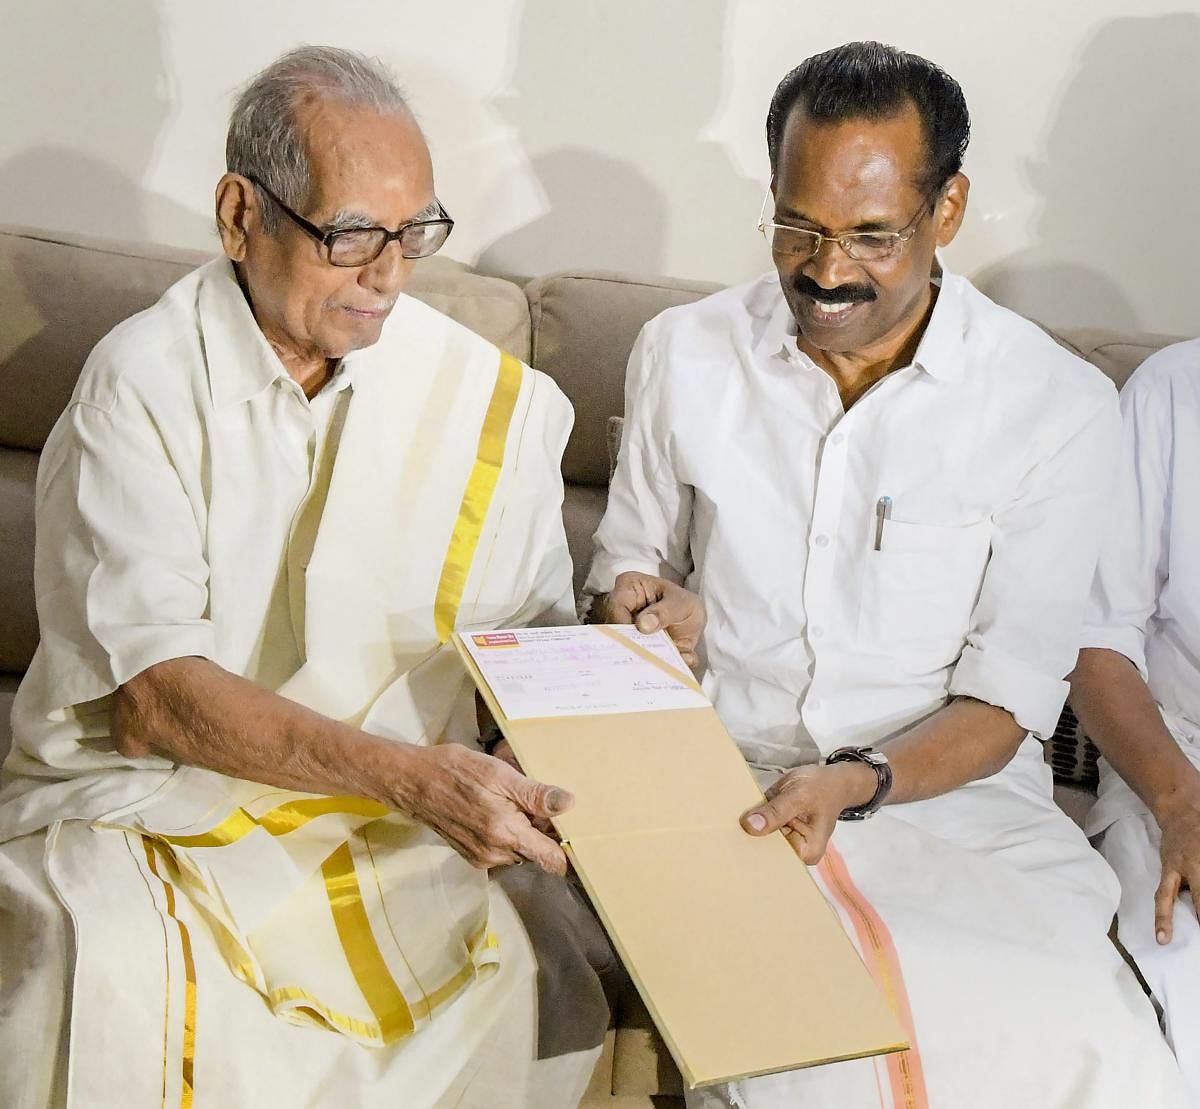 The Zamorin of Calicut, K C Unni Anjan Raja, hands over a cheque of Rs 25 lakh to Kerala Minister T P Ramakrishnan towards the flood relief fund, in Kozhikode on Monday. (PTI Photo)